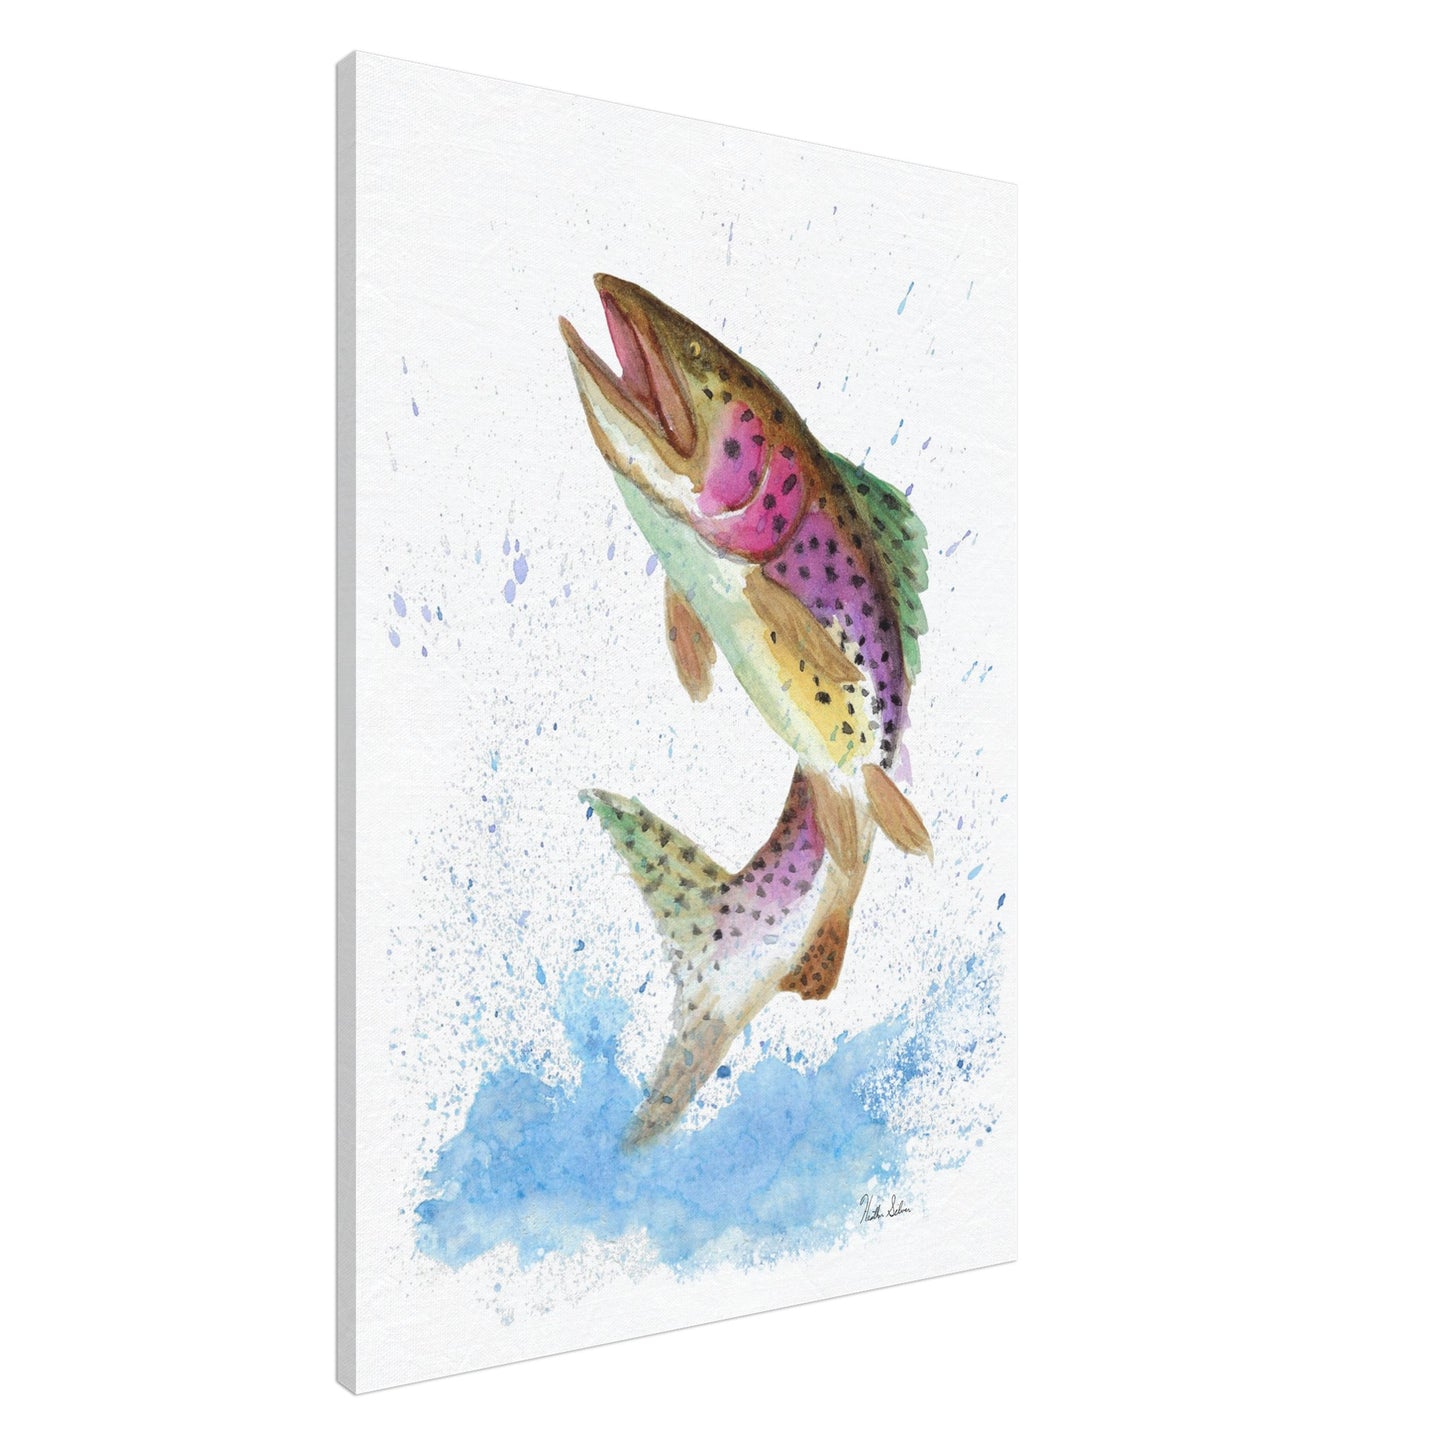 28 by 40 inch slim canvas wall art print featuring a watercolor painting of a rainbow trout leaping from the water. Shown at an angle.